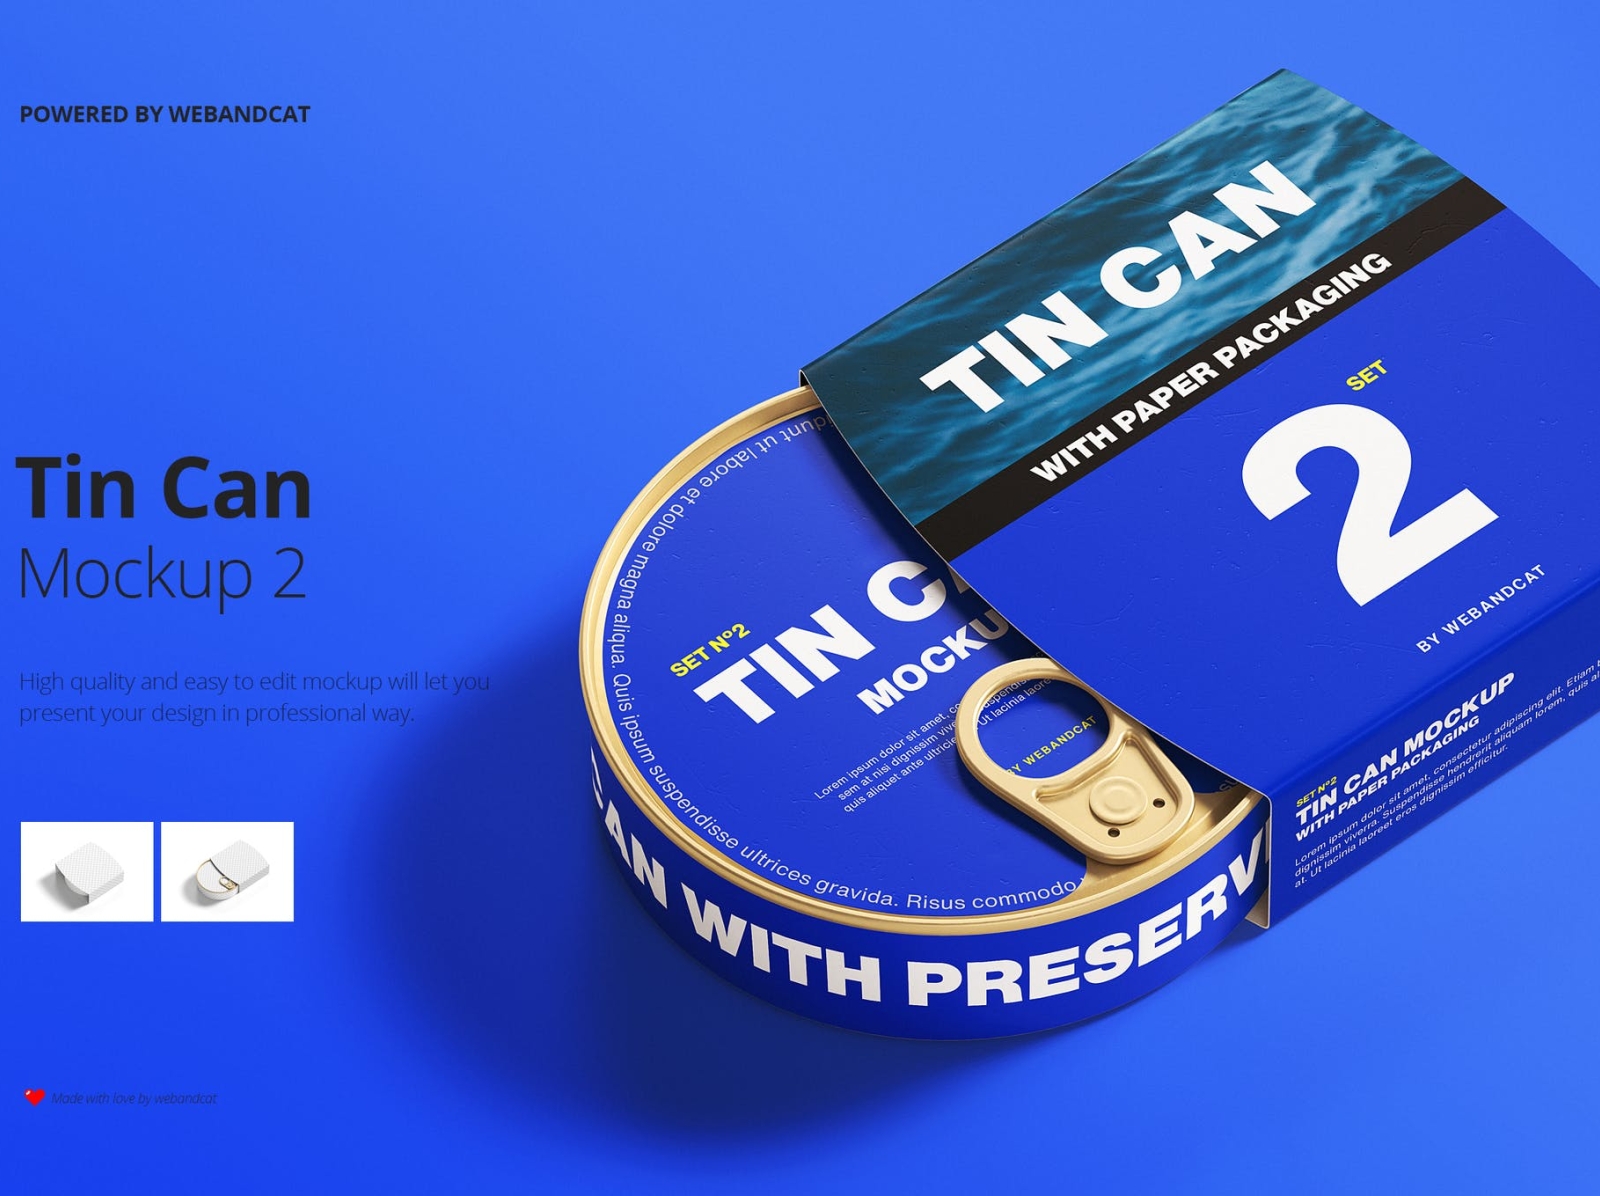 Tin Can Mockup with Paper Packaging